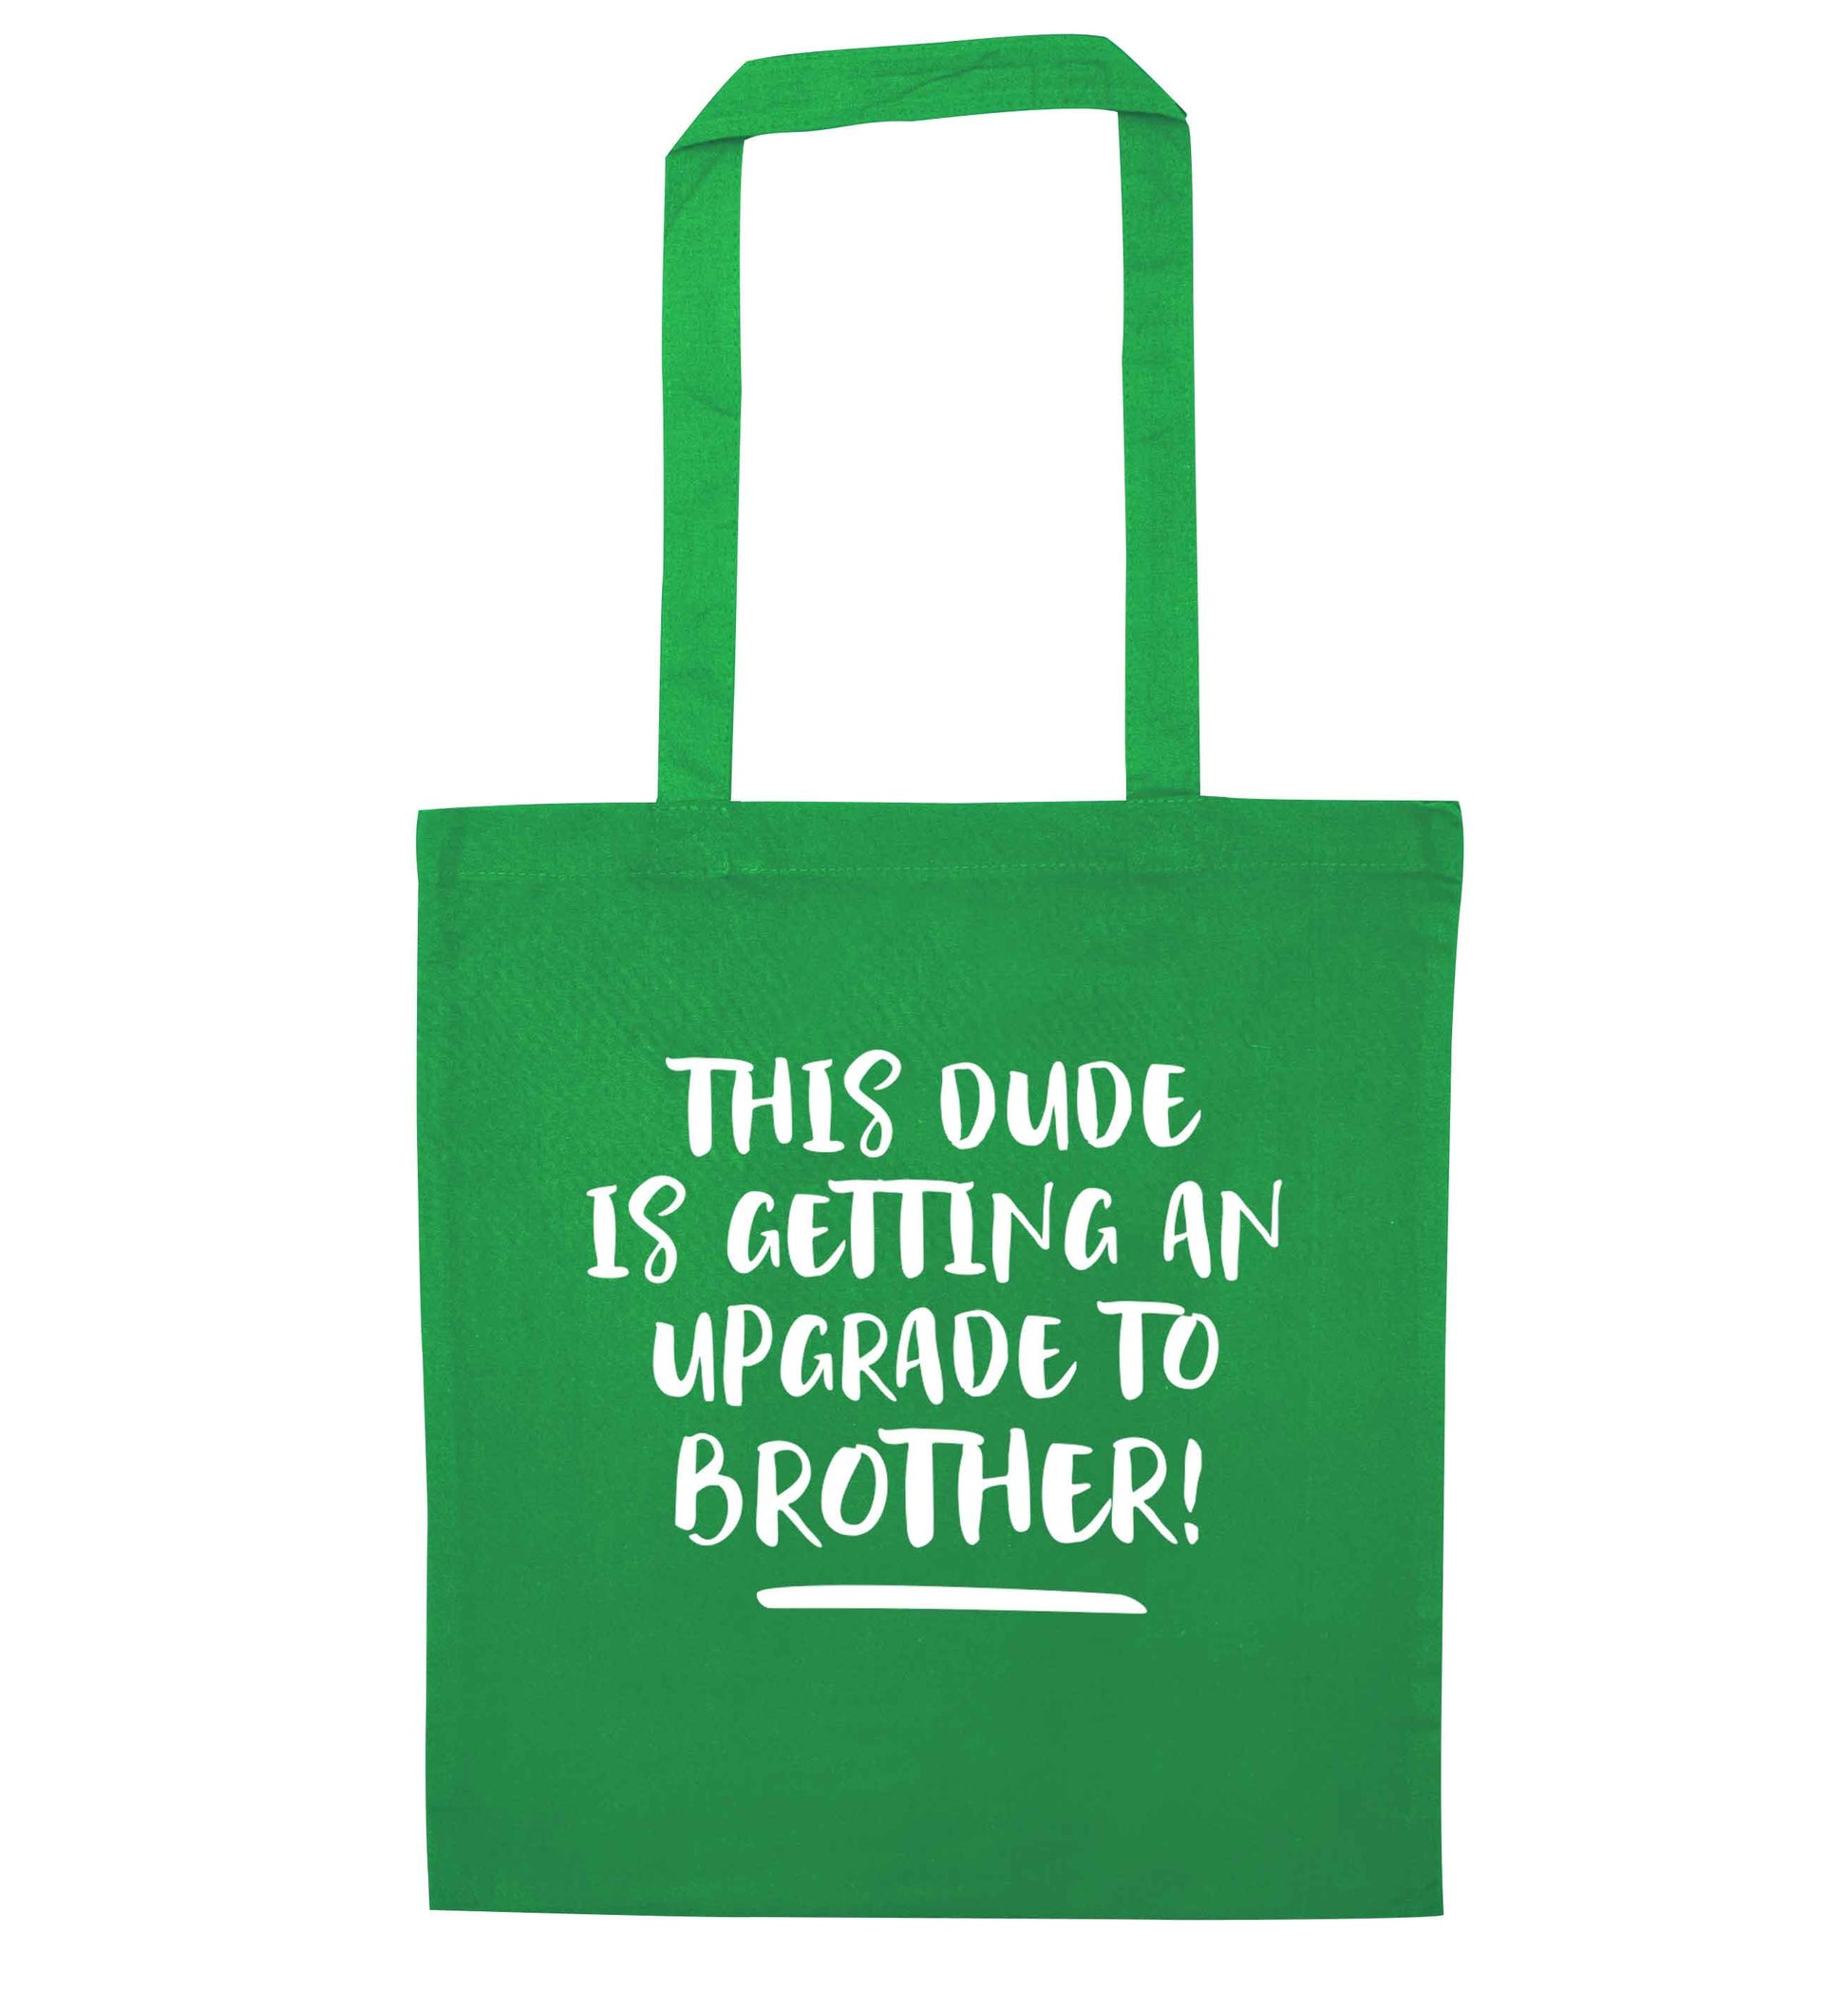 This dude is getting an upgrade to brother! green tote bag